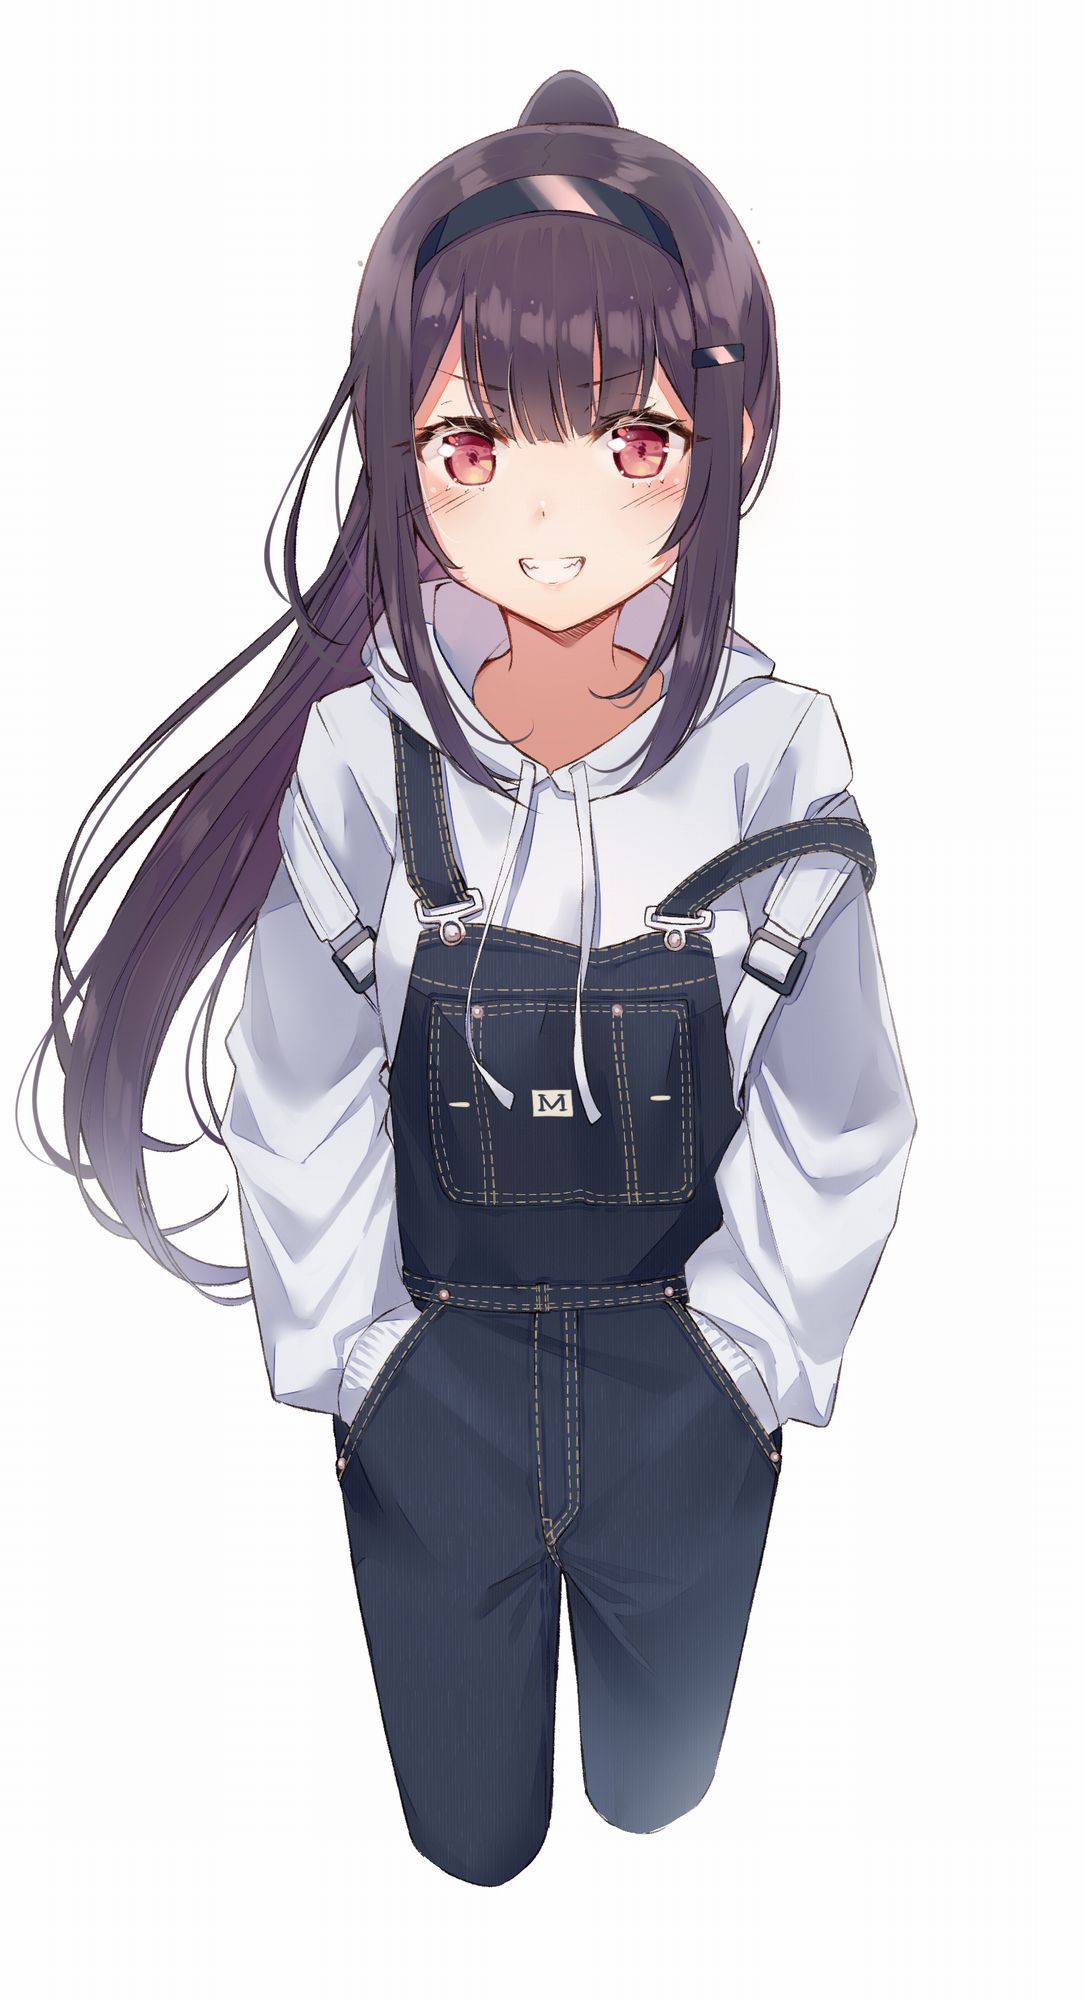 [Lori Denim] I tried to collect stylish and cute moe image of Lori girl wearing jeans and denim products! 22